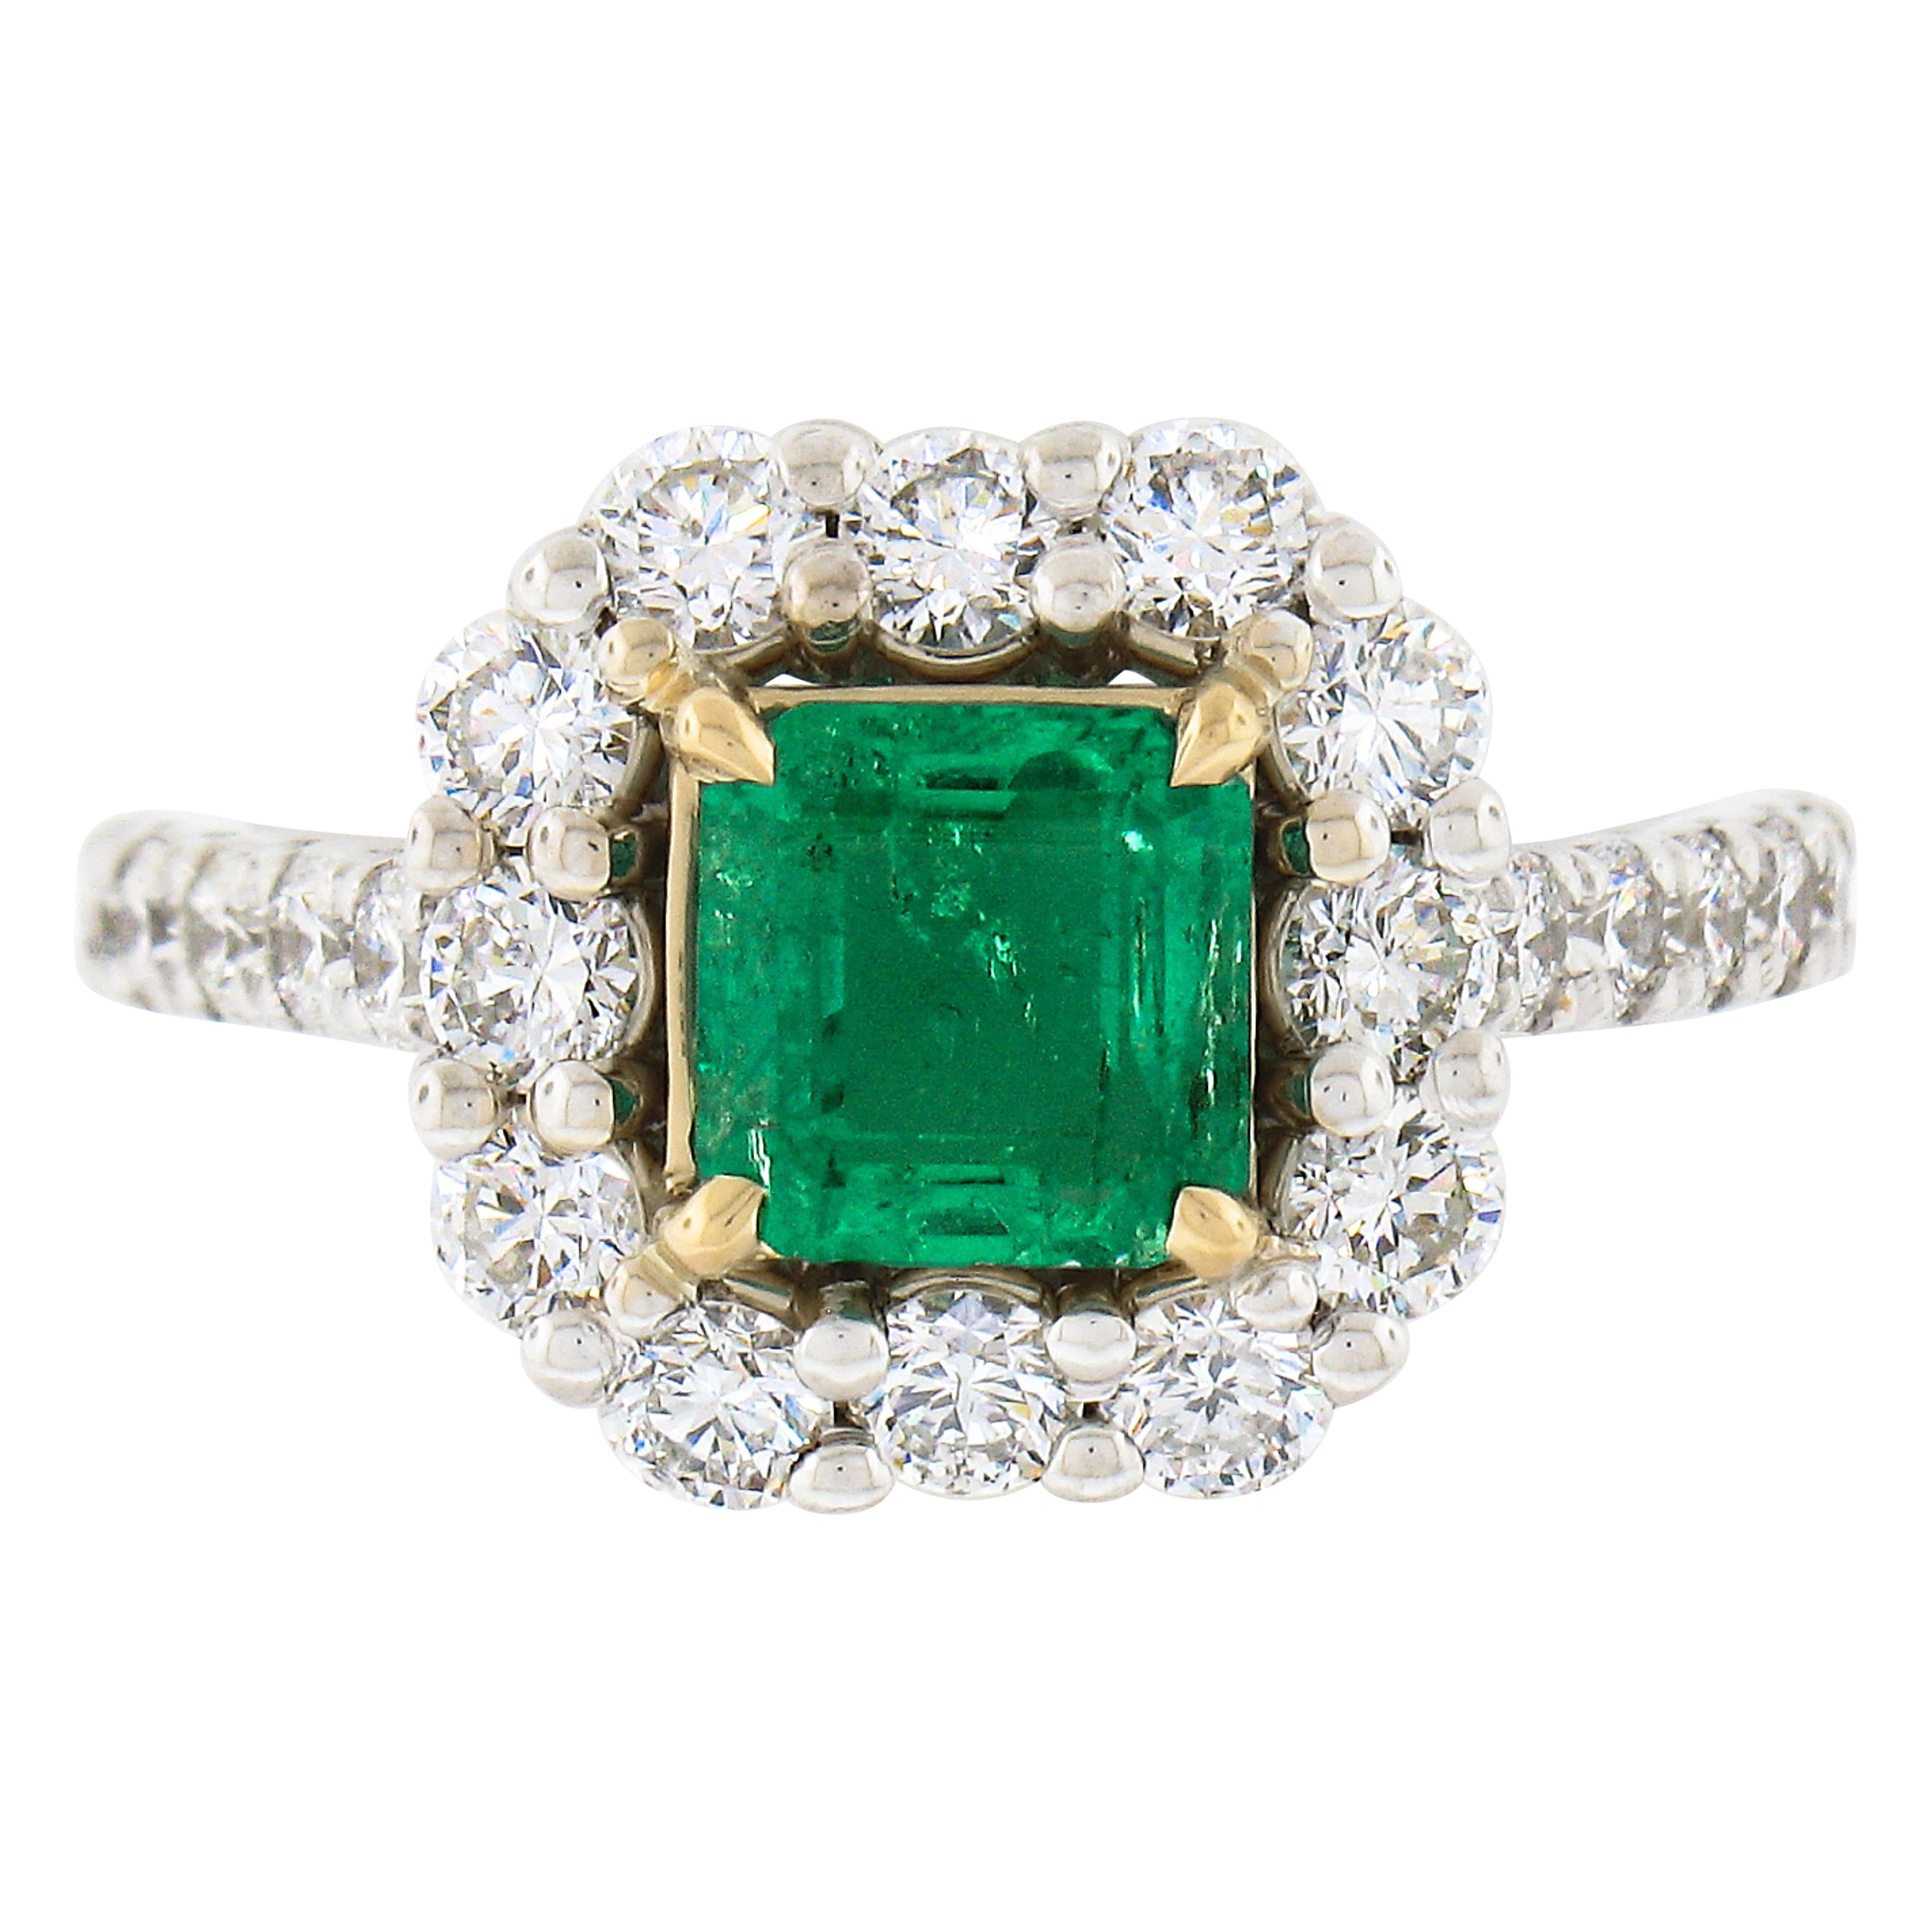 New 18k TT Gold 2.51ctw GIA Colombia Green Emerald w/ Diamond Halo Cocktail Ring